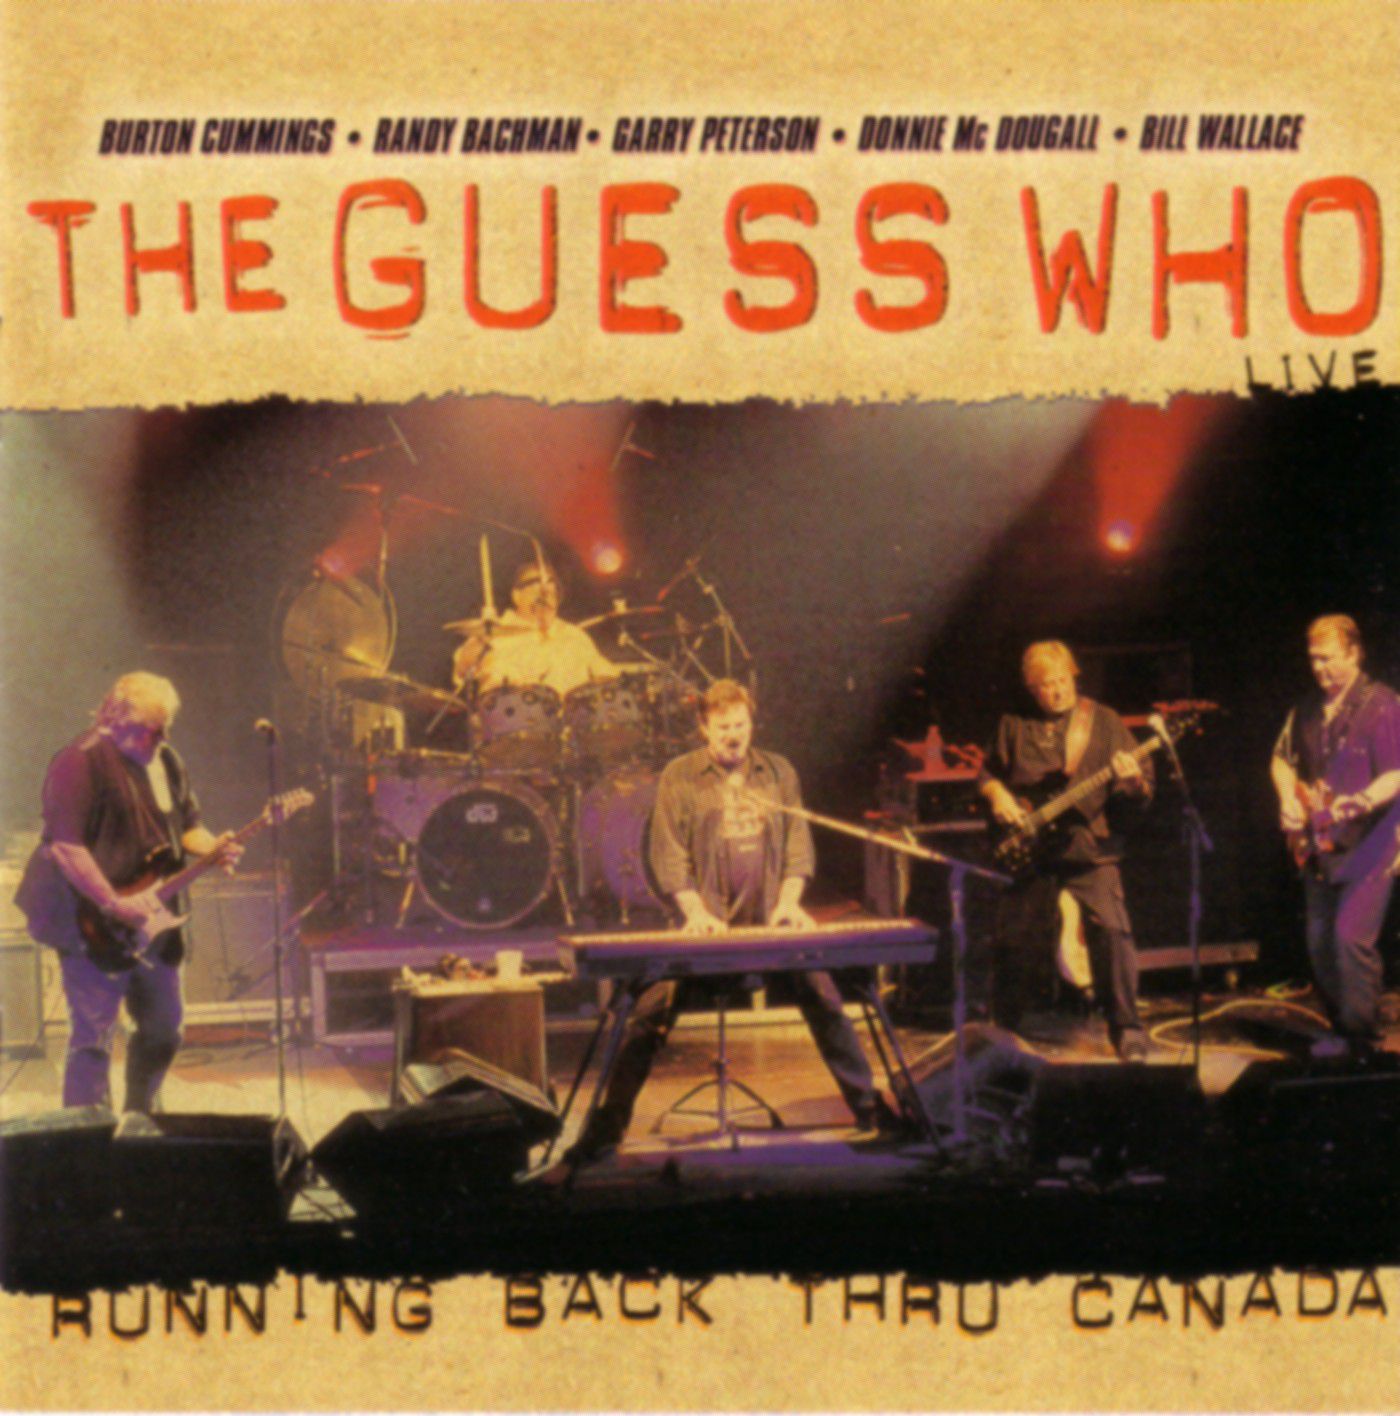 Guess Who - Running Back Through Canada